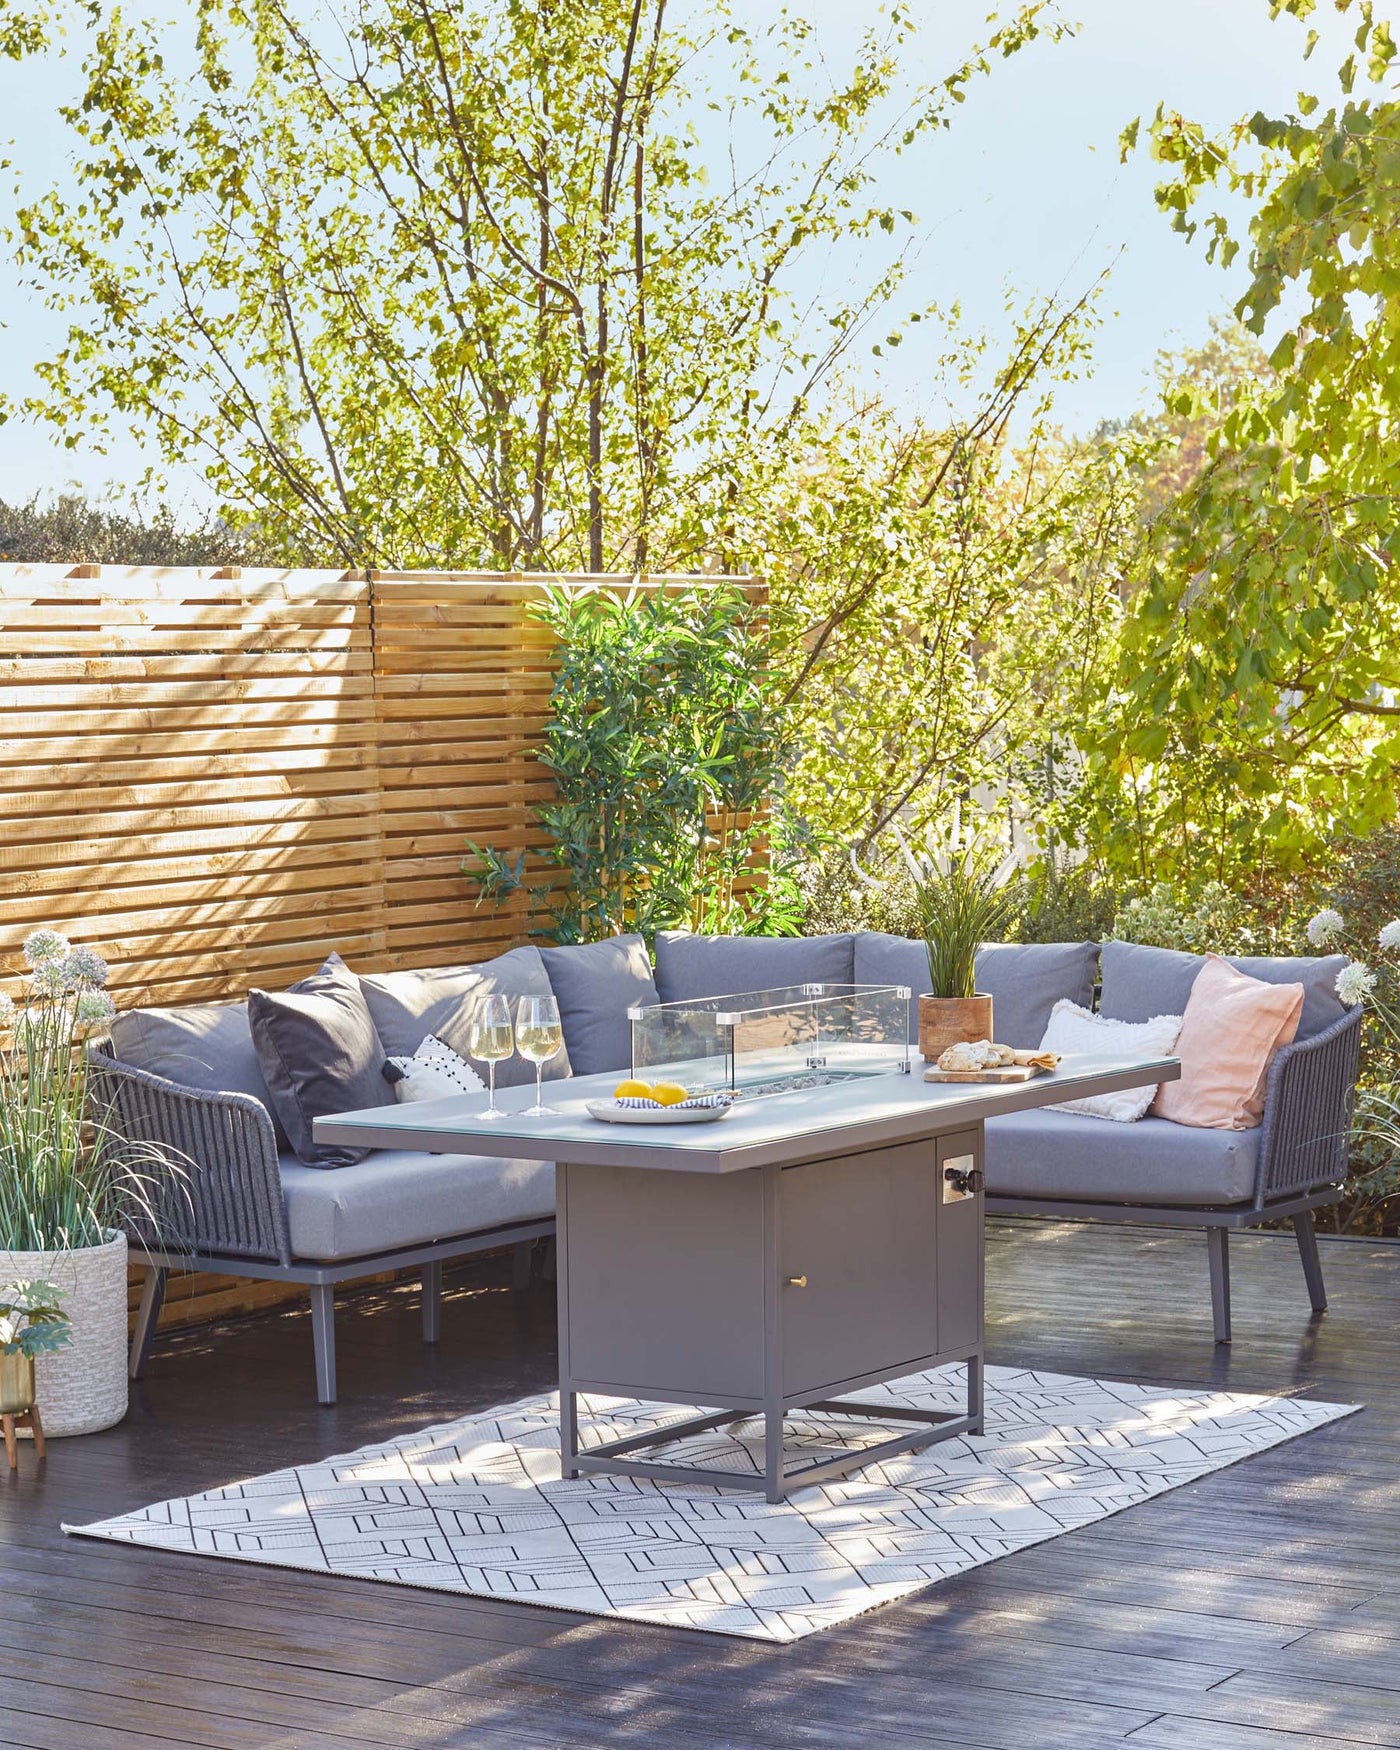 Outdoor patio set featuring a modern, grey sectional sofa with comfortable cushions and pillows, a sleek rectangular coffee table with a glass top and built-in storage, paired with a geometric-patterned rug. The setting is complemented by greenery, adding a natural and serene backdrop.